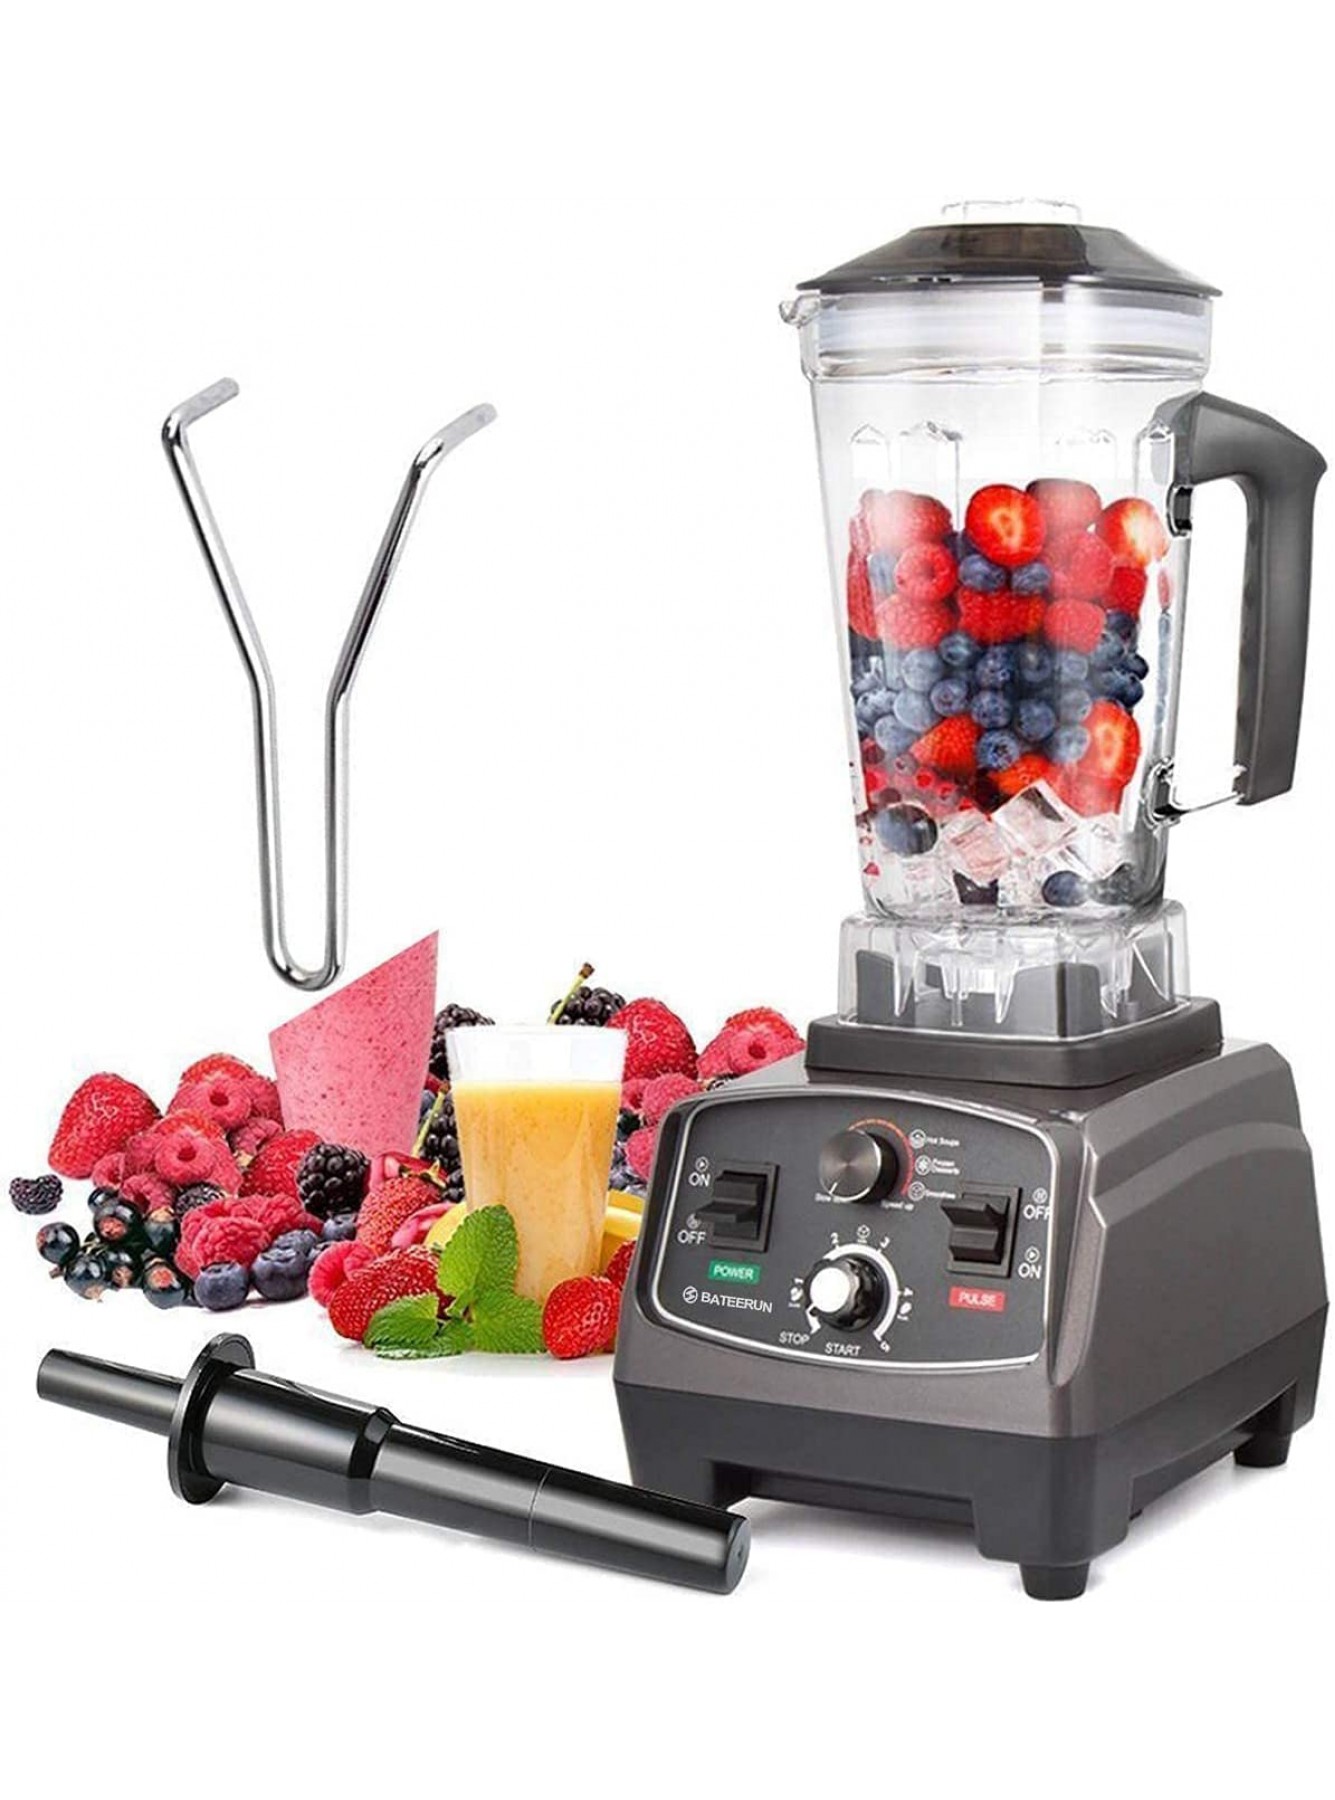 BATEERUN Blender Professional Countertop Blender with Tool 2200W High Speed Smoothie Blender for Shakes and Smoothies commercial blender easy to disassemble the blade B08ZYXFMW3